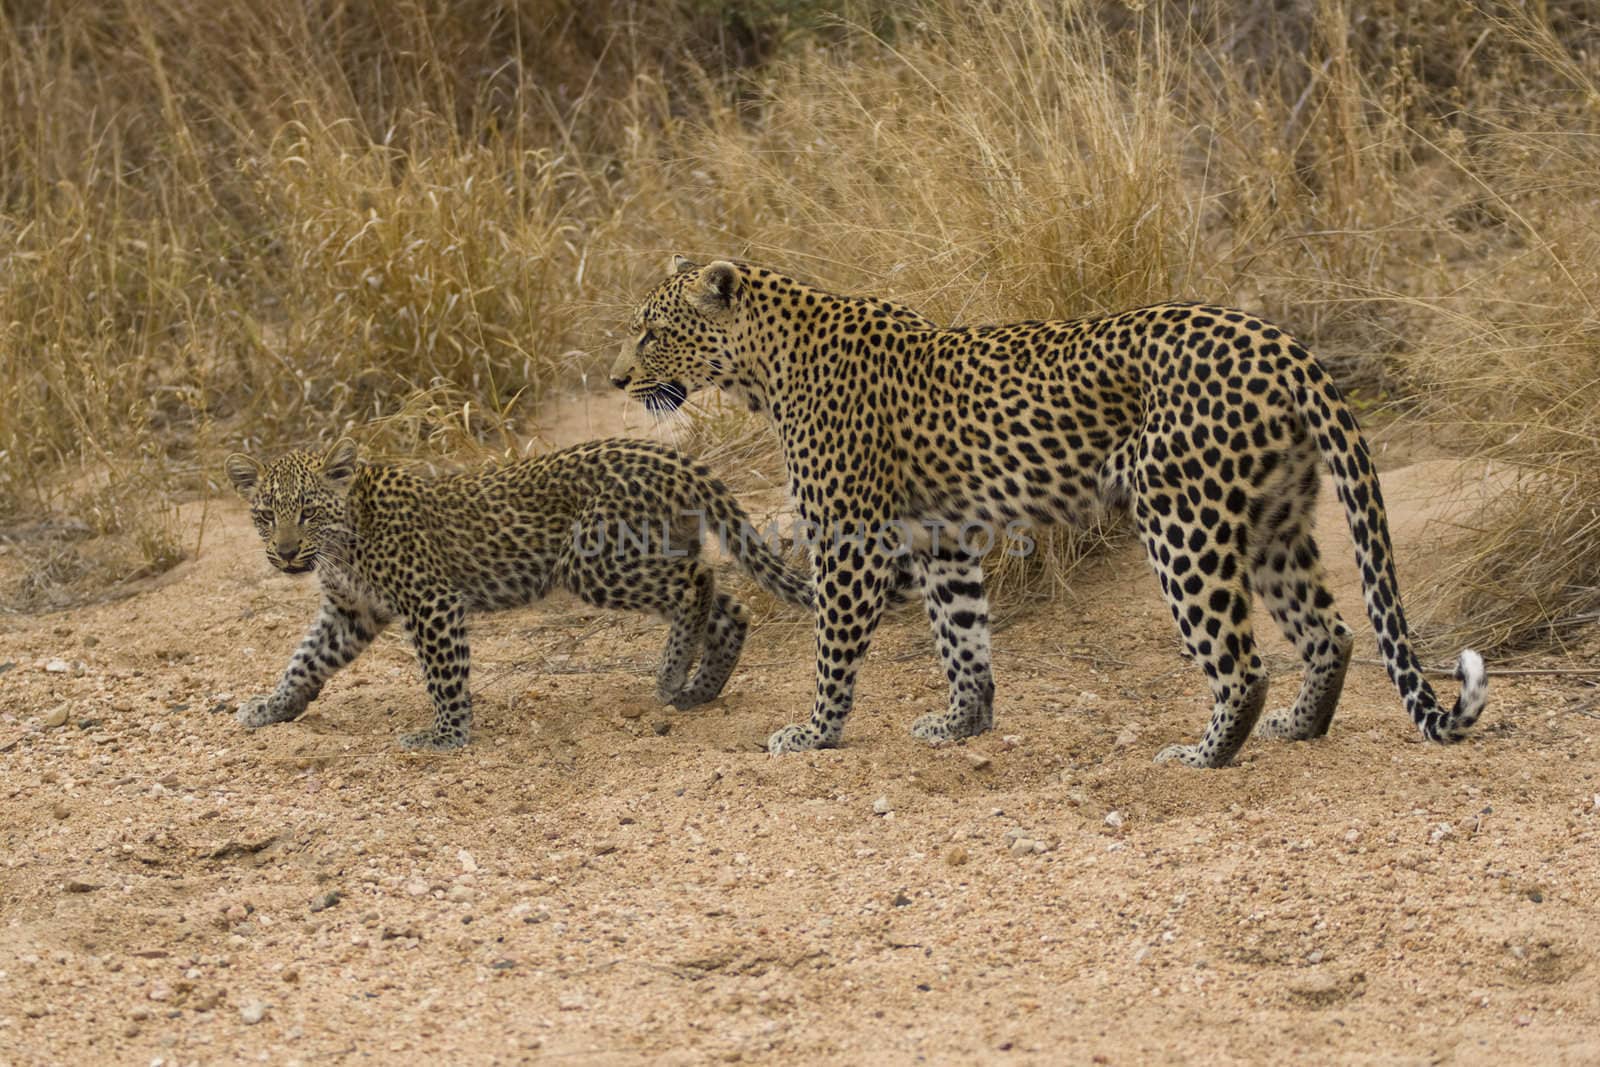 Female leopard (Panthera pardus) and cub walking along the sandy bed of a dried up seasonal river in Kruger National Park, South Africa